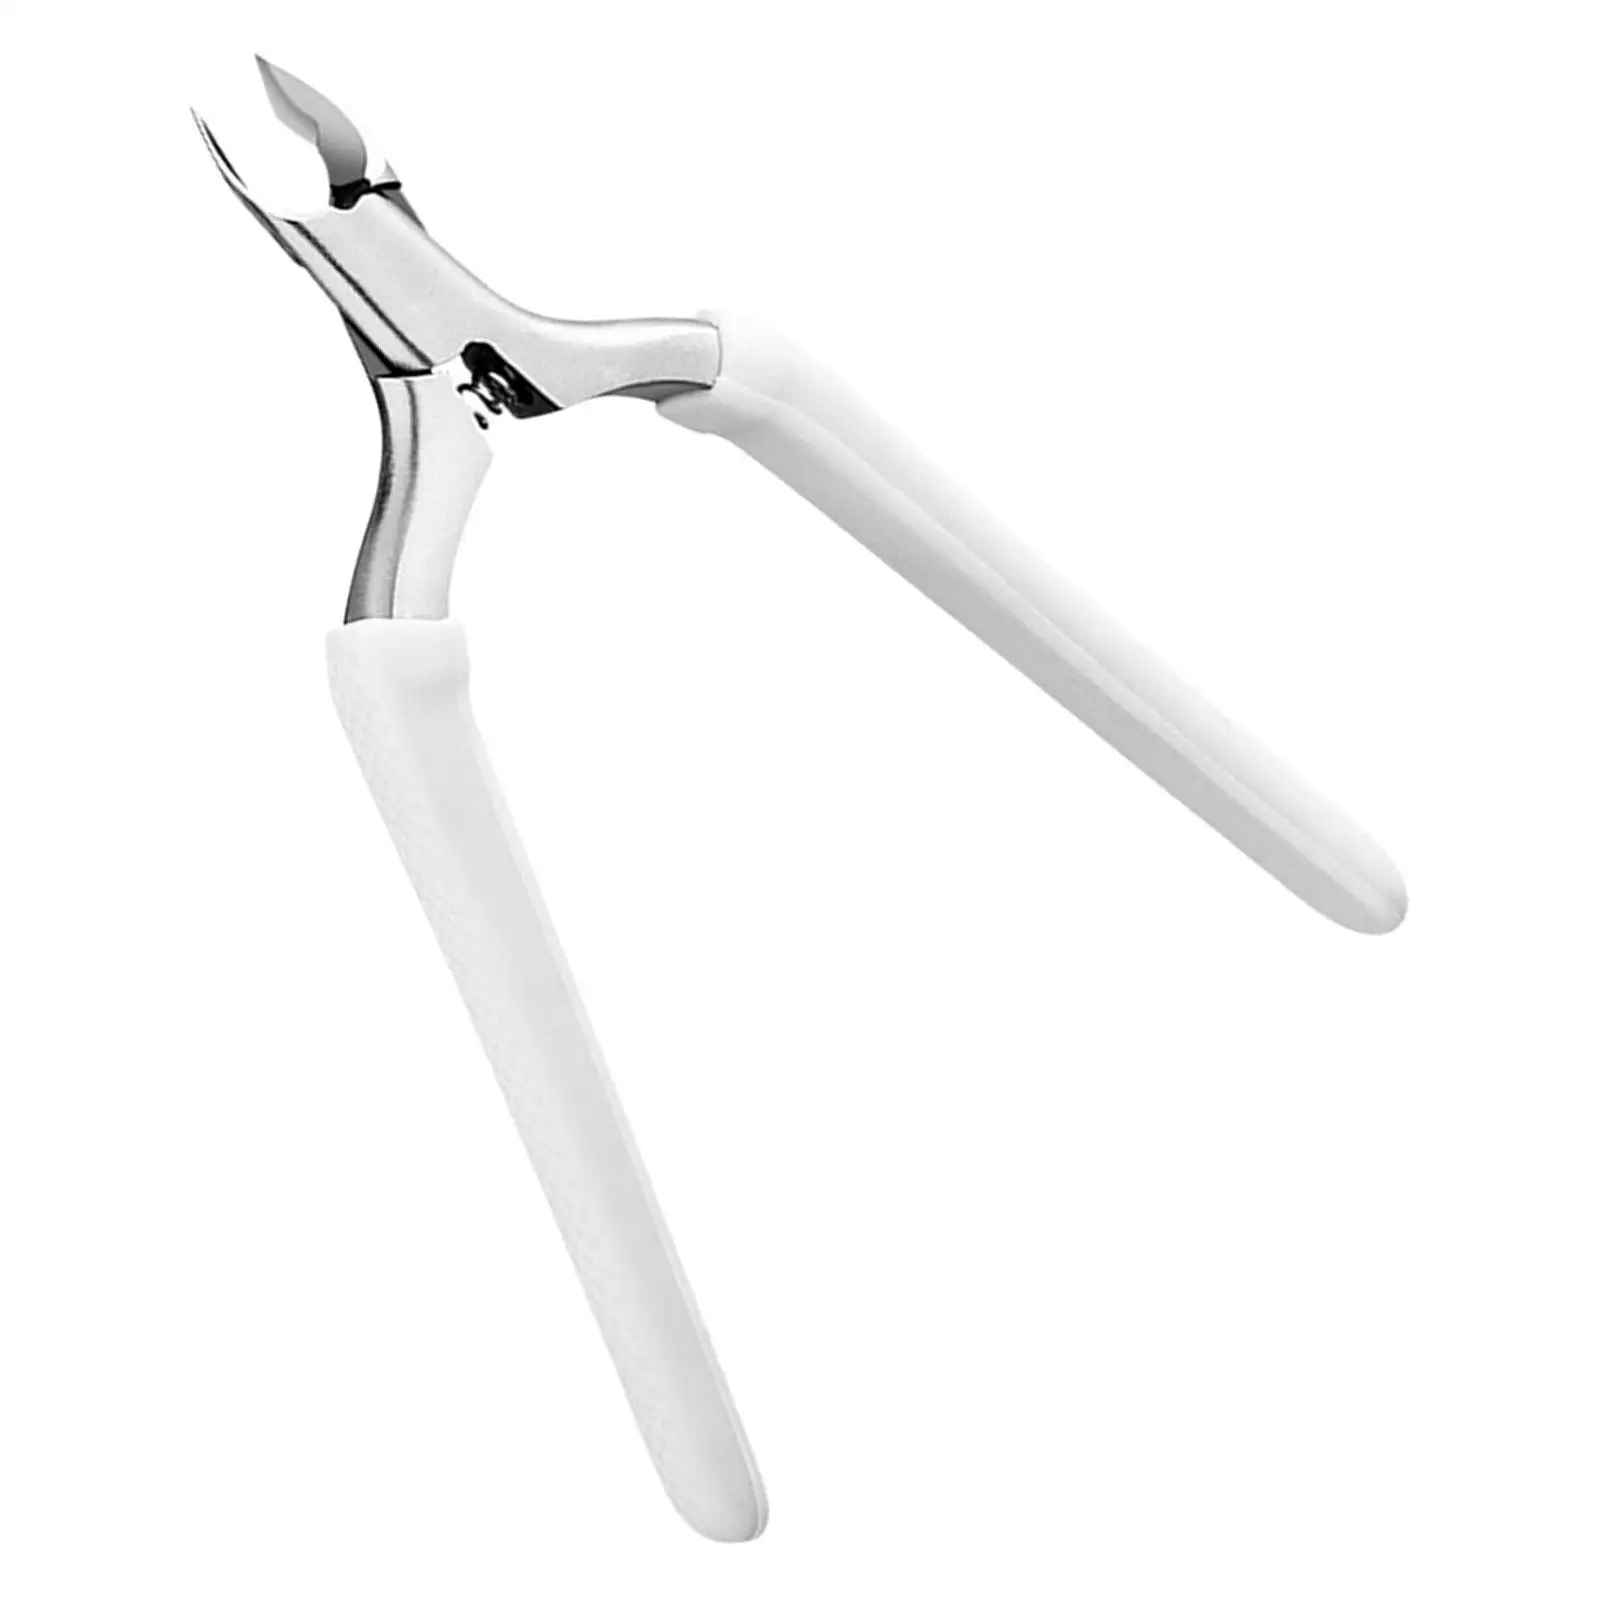 Cuticle Dry Stainless Steel Nail Care Tool Cuticle Cutter for SPA